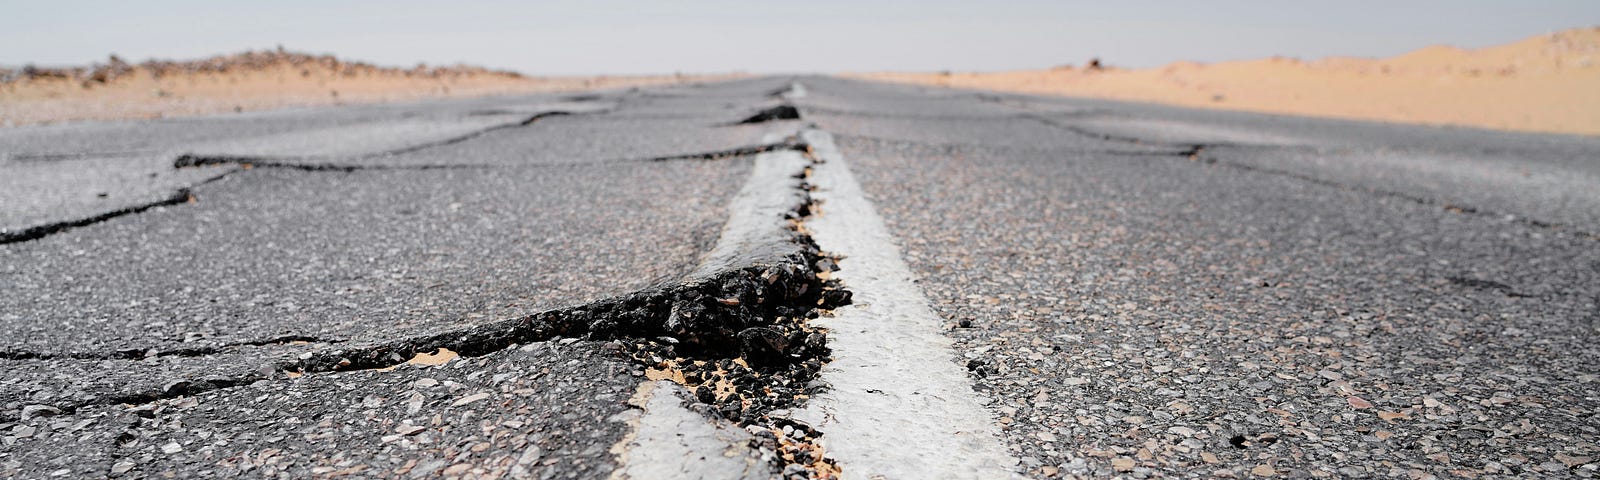 A road cracked from a recent earthquake.